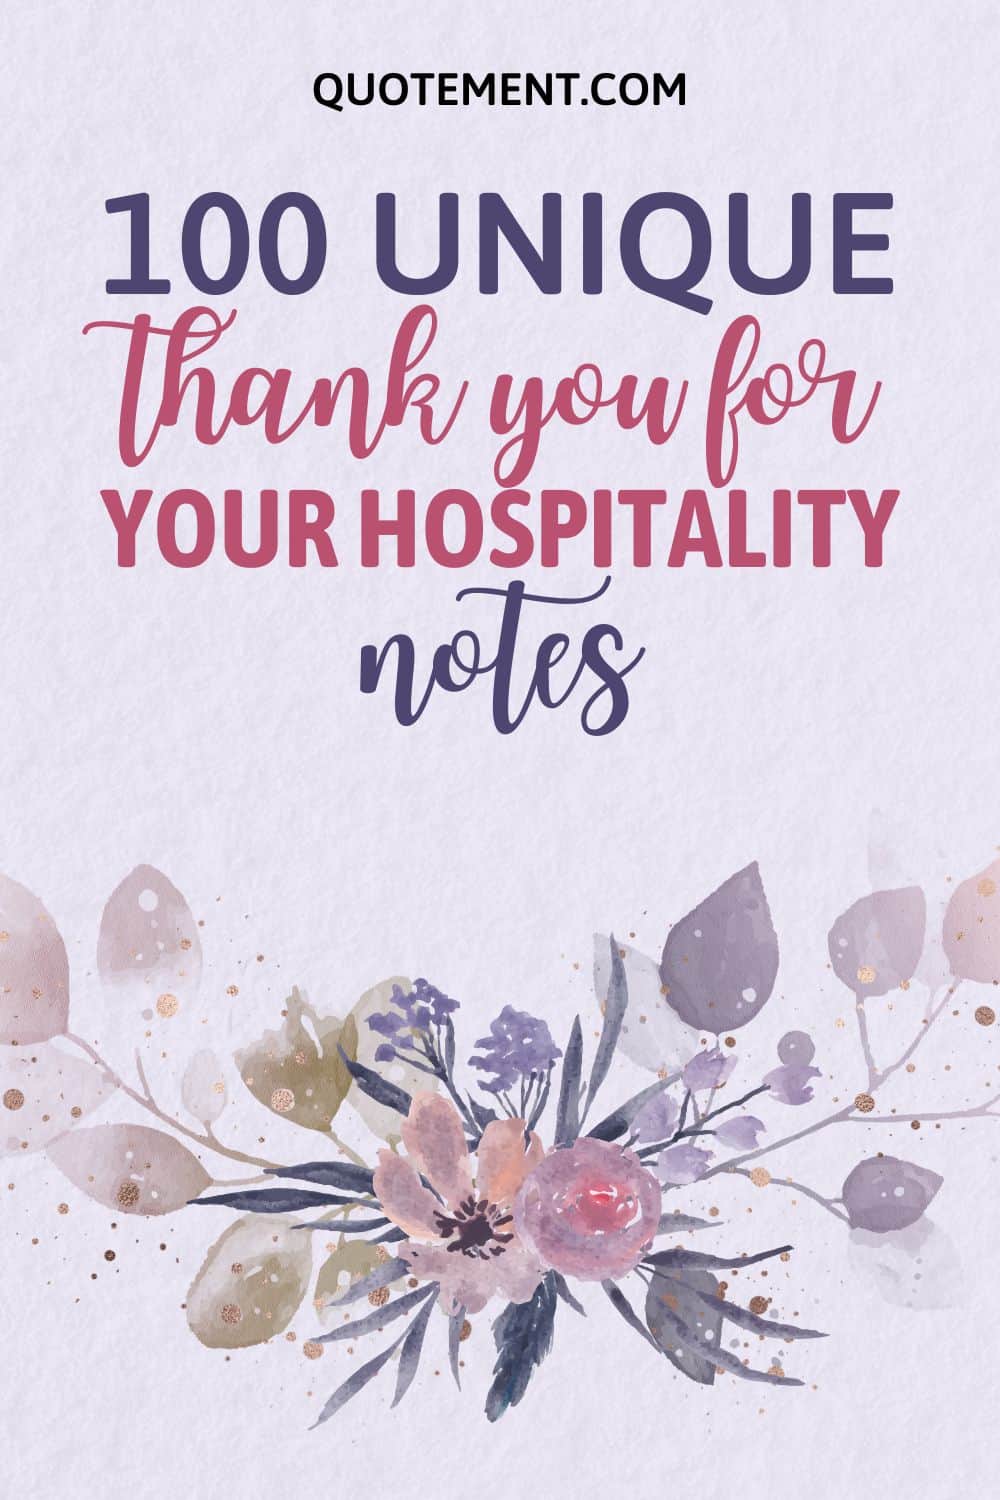 100 Unique Ways To Say Thank You For Your Hospitality
